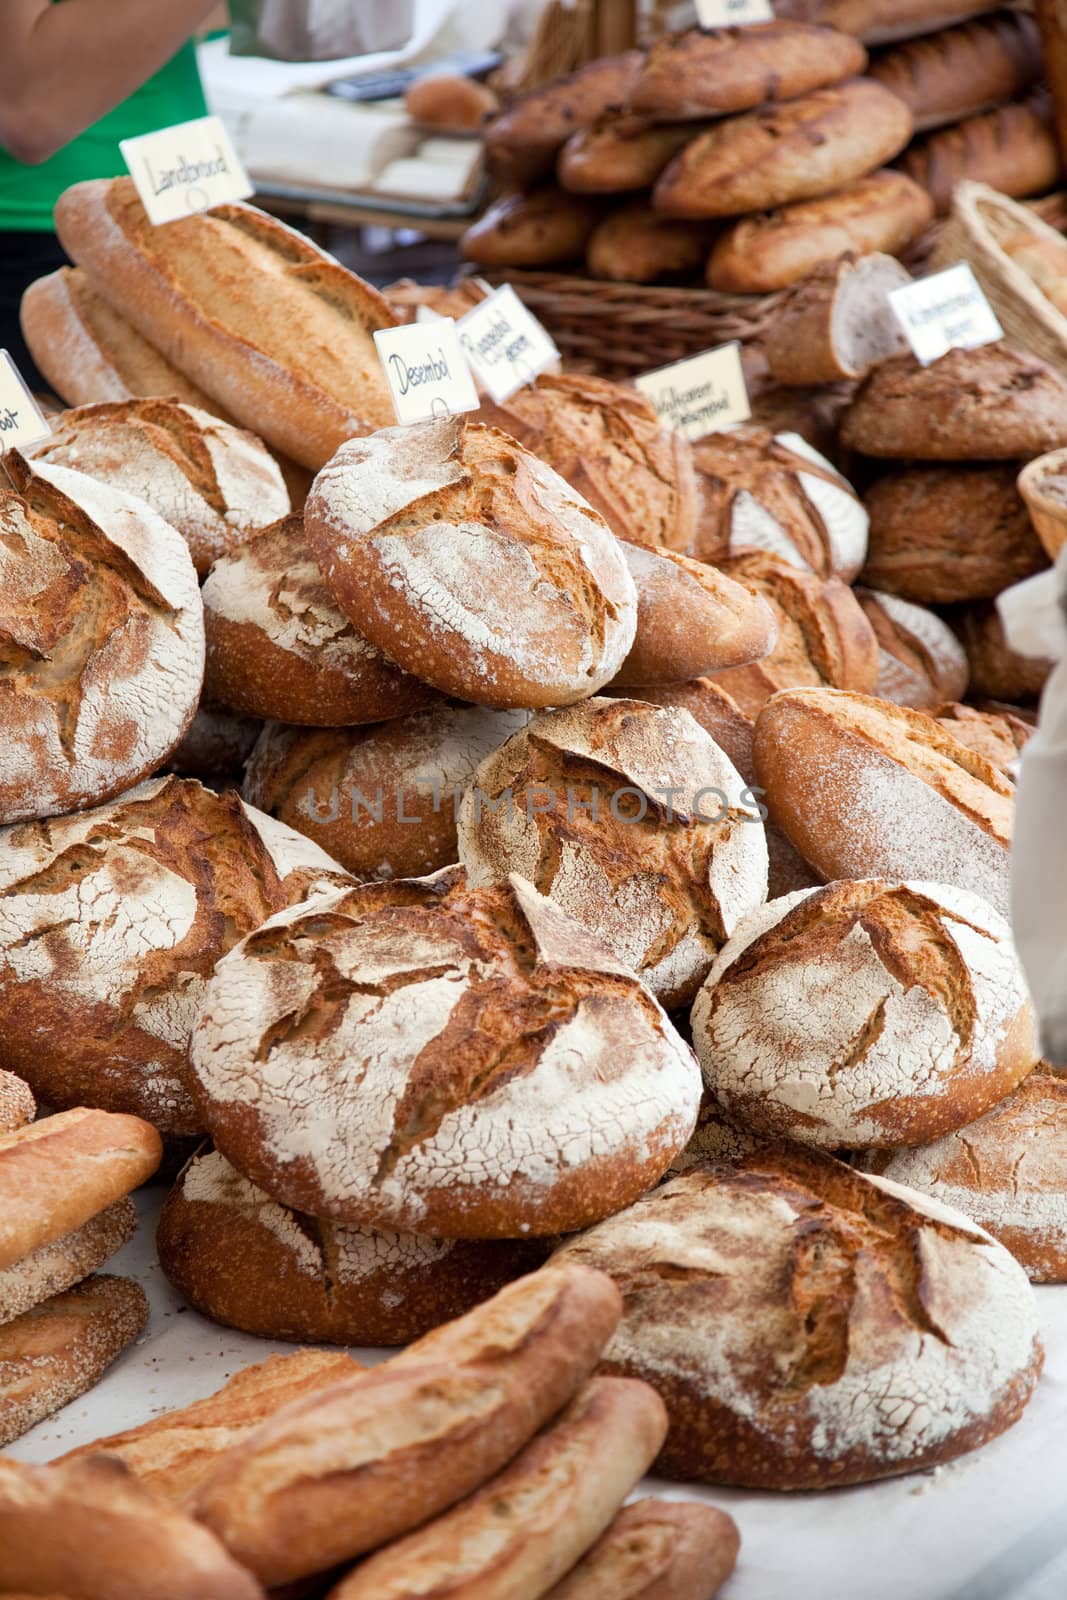 Freshly baked bread at the farmer's market (no brandlabels are shown, just the type of bread)